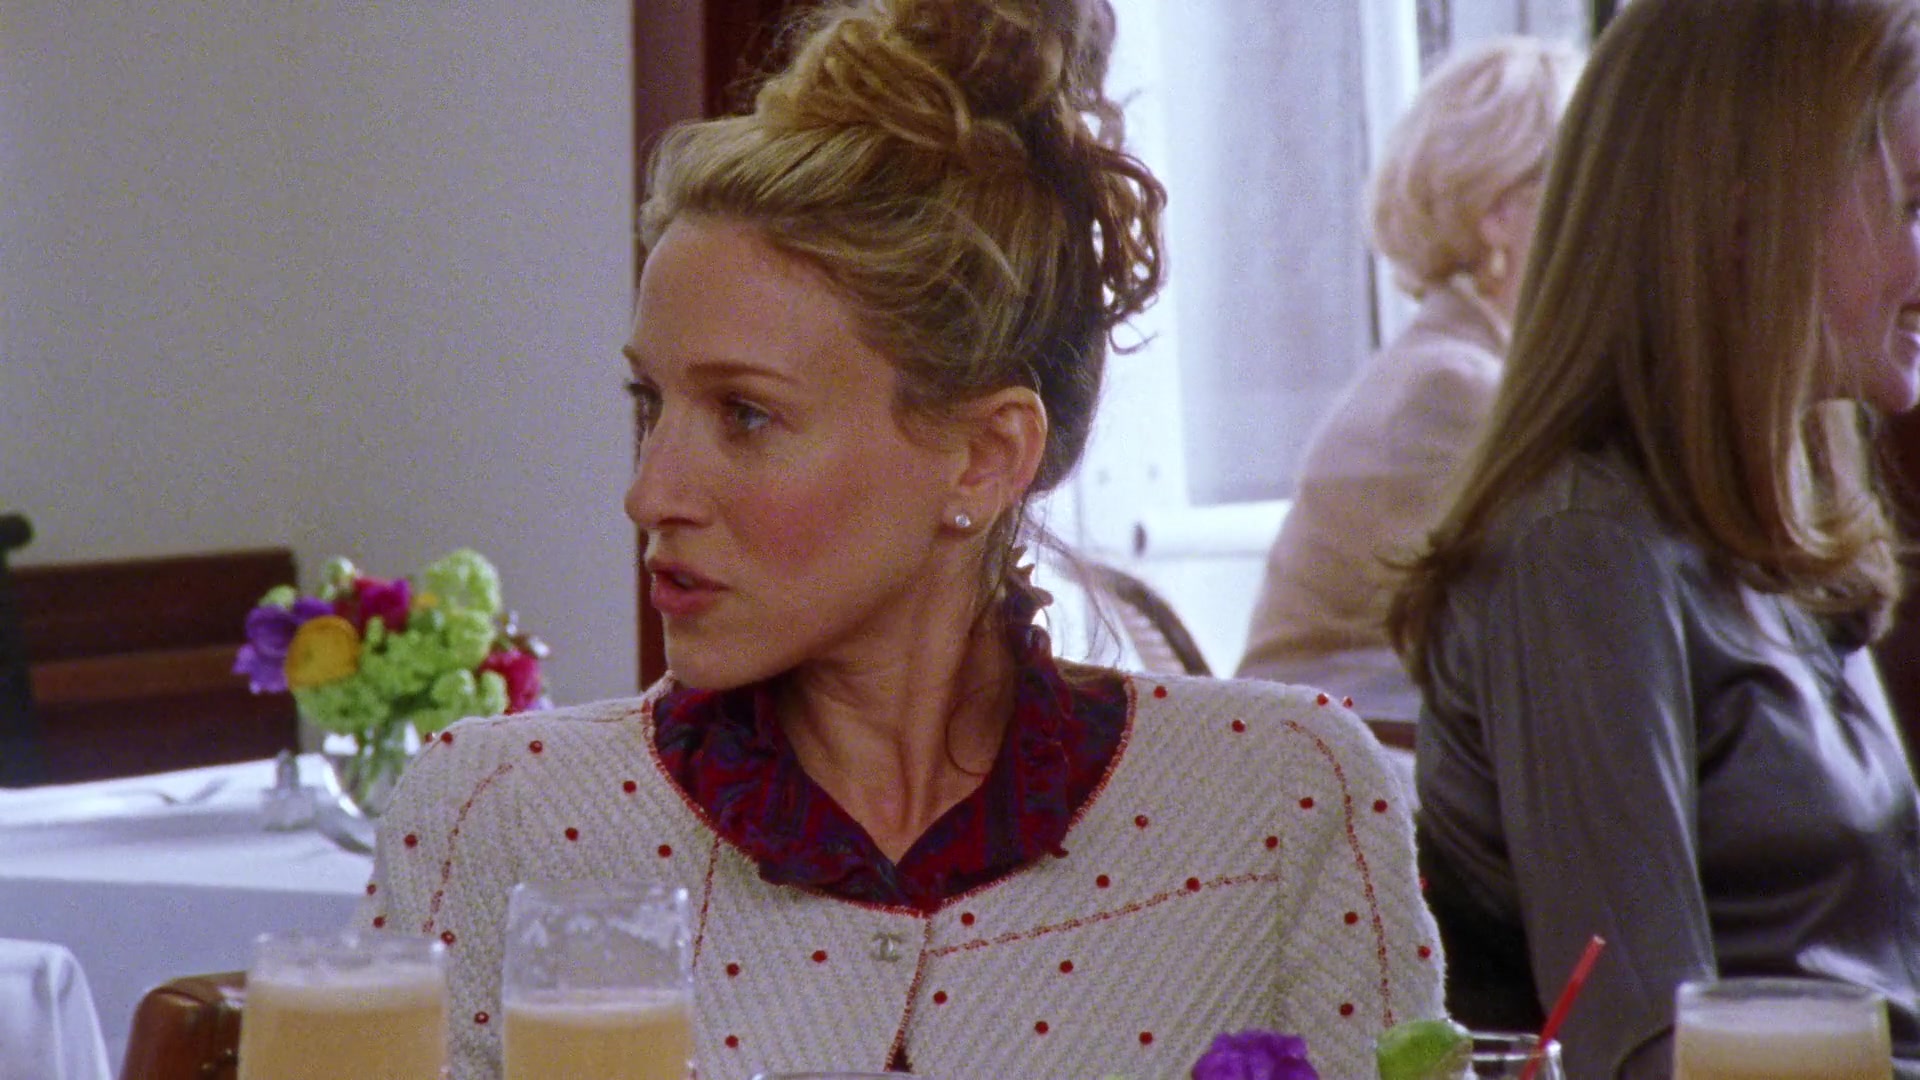 Chanel Tweed Jacket Of Sarah Jessica Parker As Carrie Bradshaw In Sex And  The City S03E03 Attack Of The 5'10 Woman (2000)